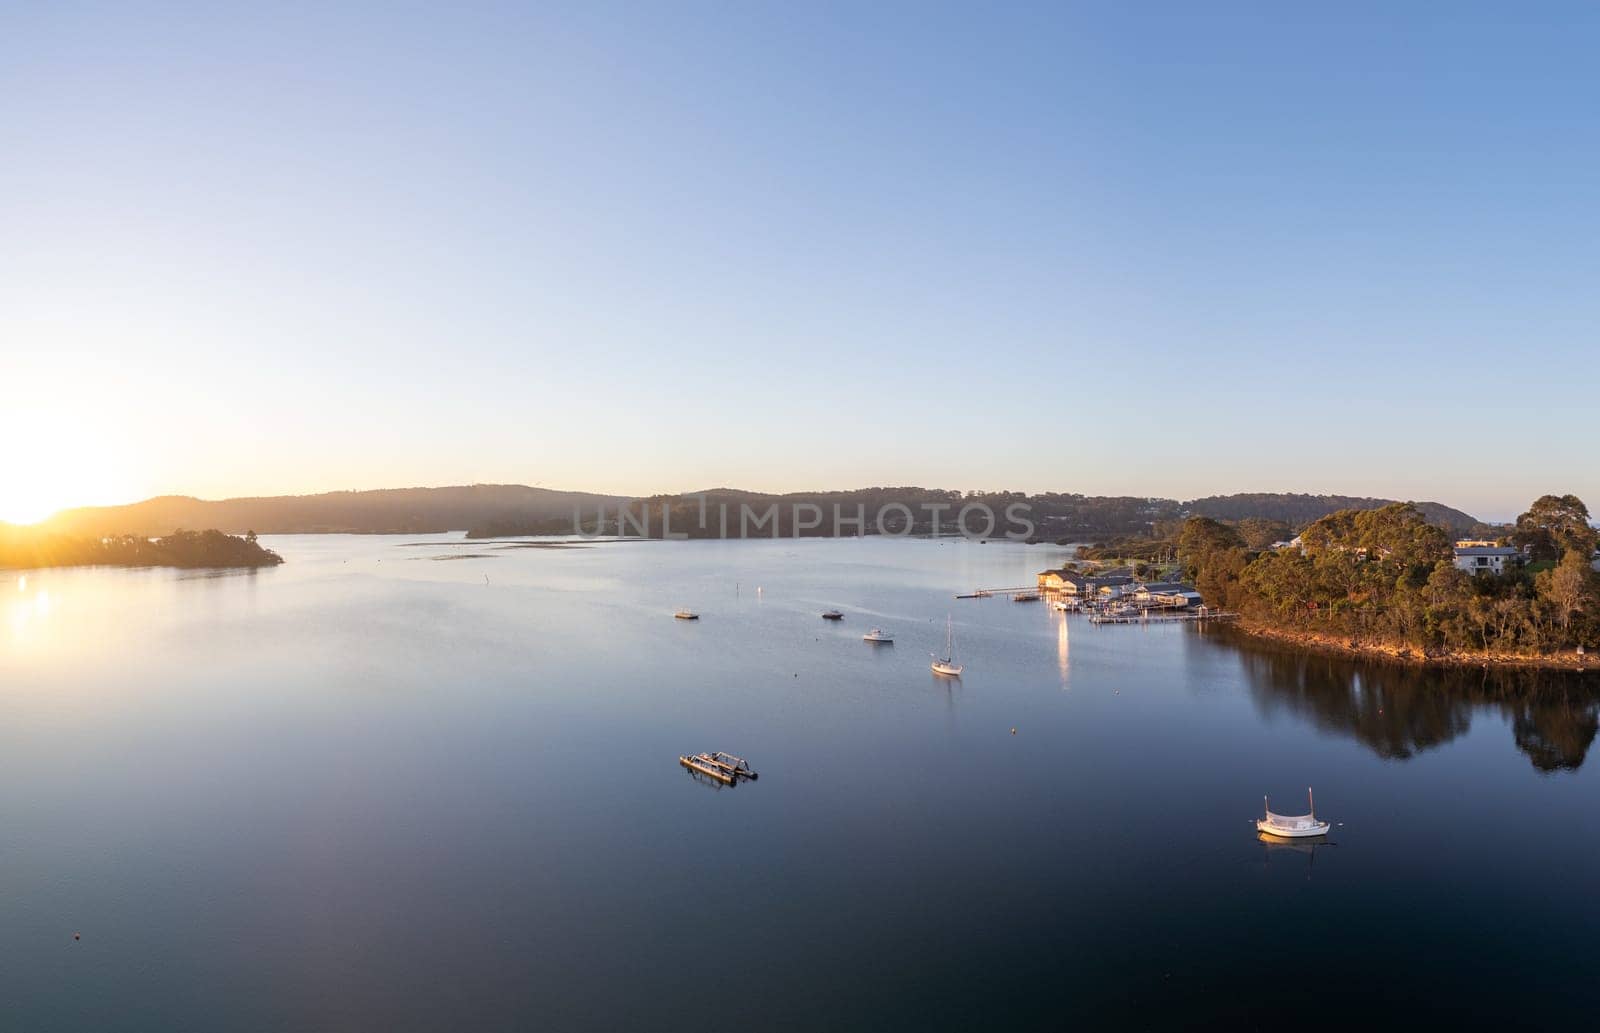 Aerial view of the idyllic coastal town of Narooma at sunset wrapped around the famous Wagonga Inlet in South Coast, New South Wales, Australia